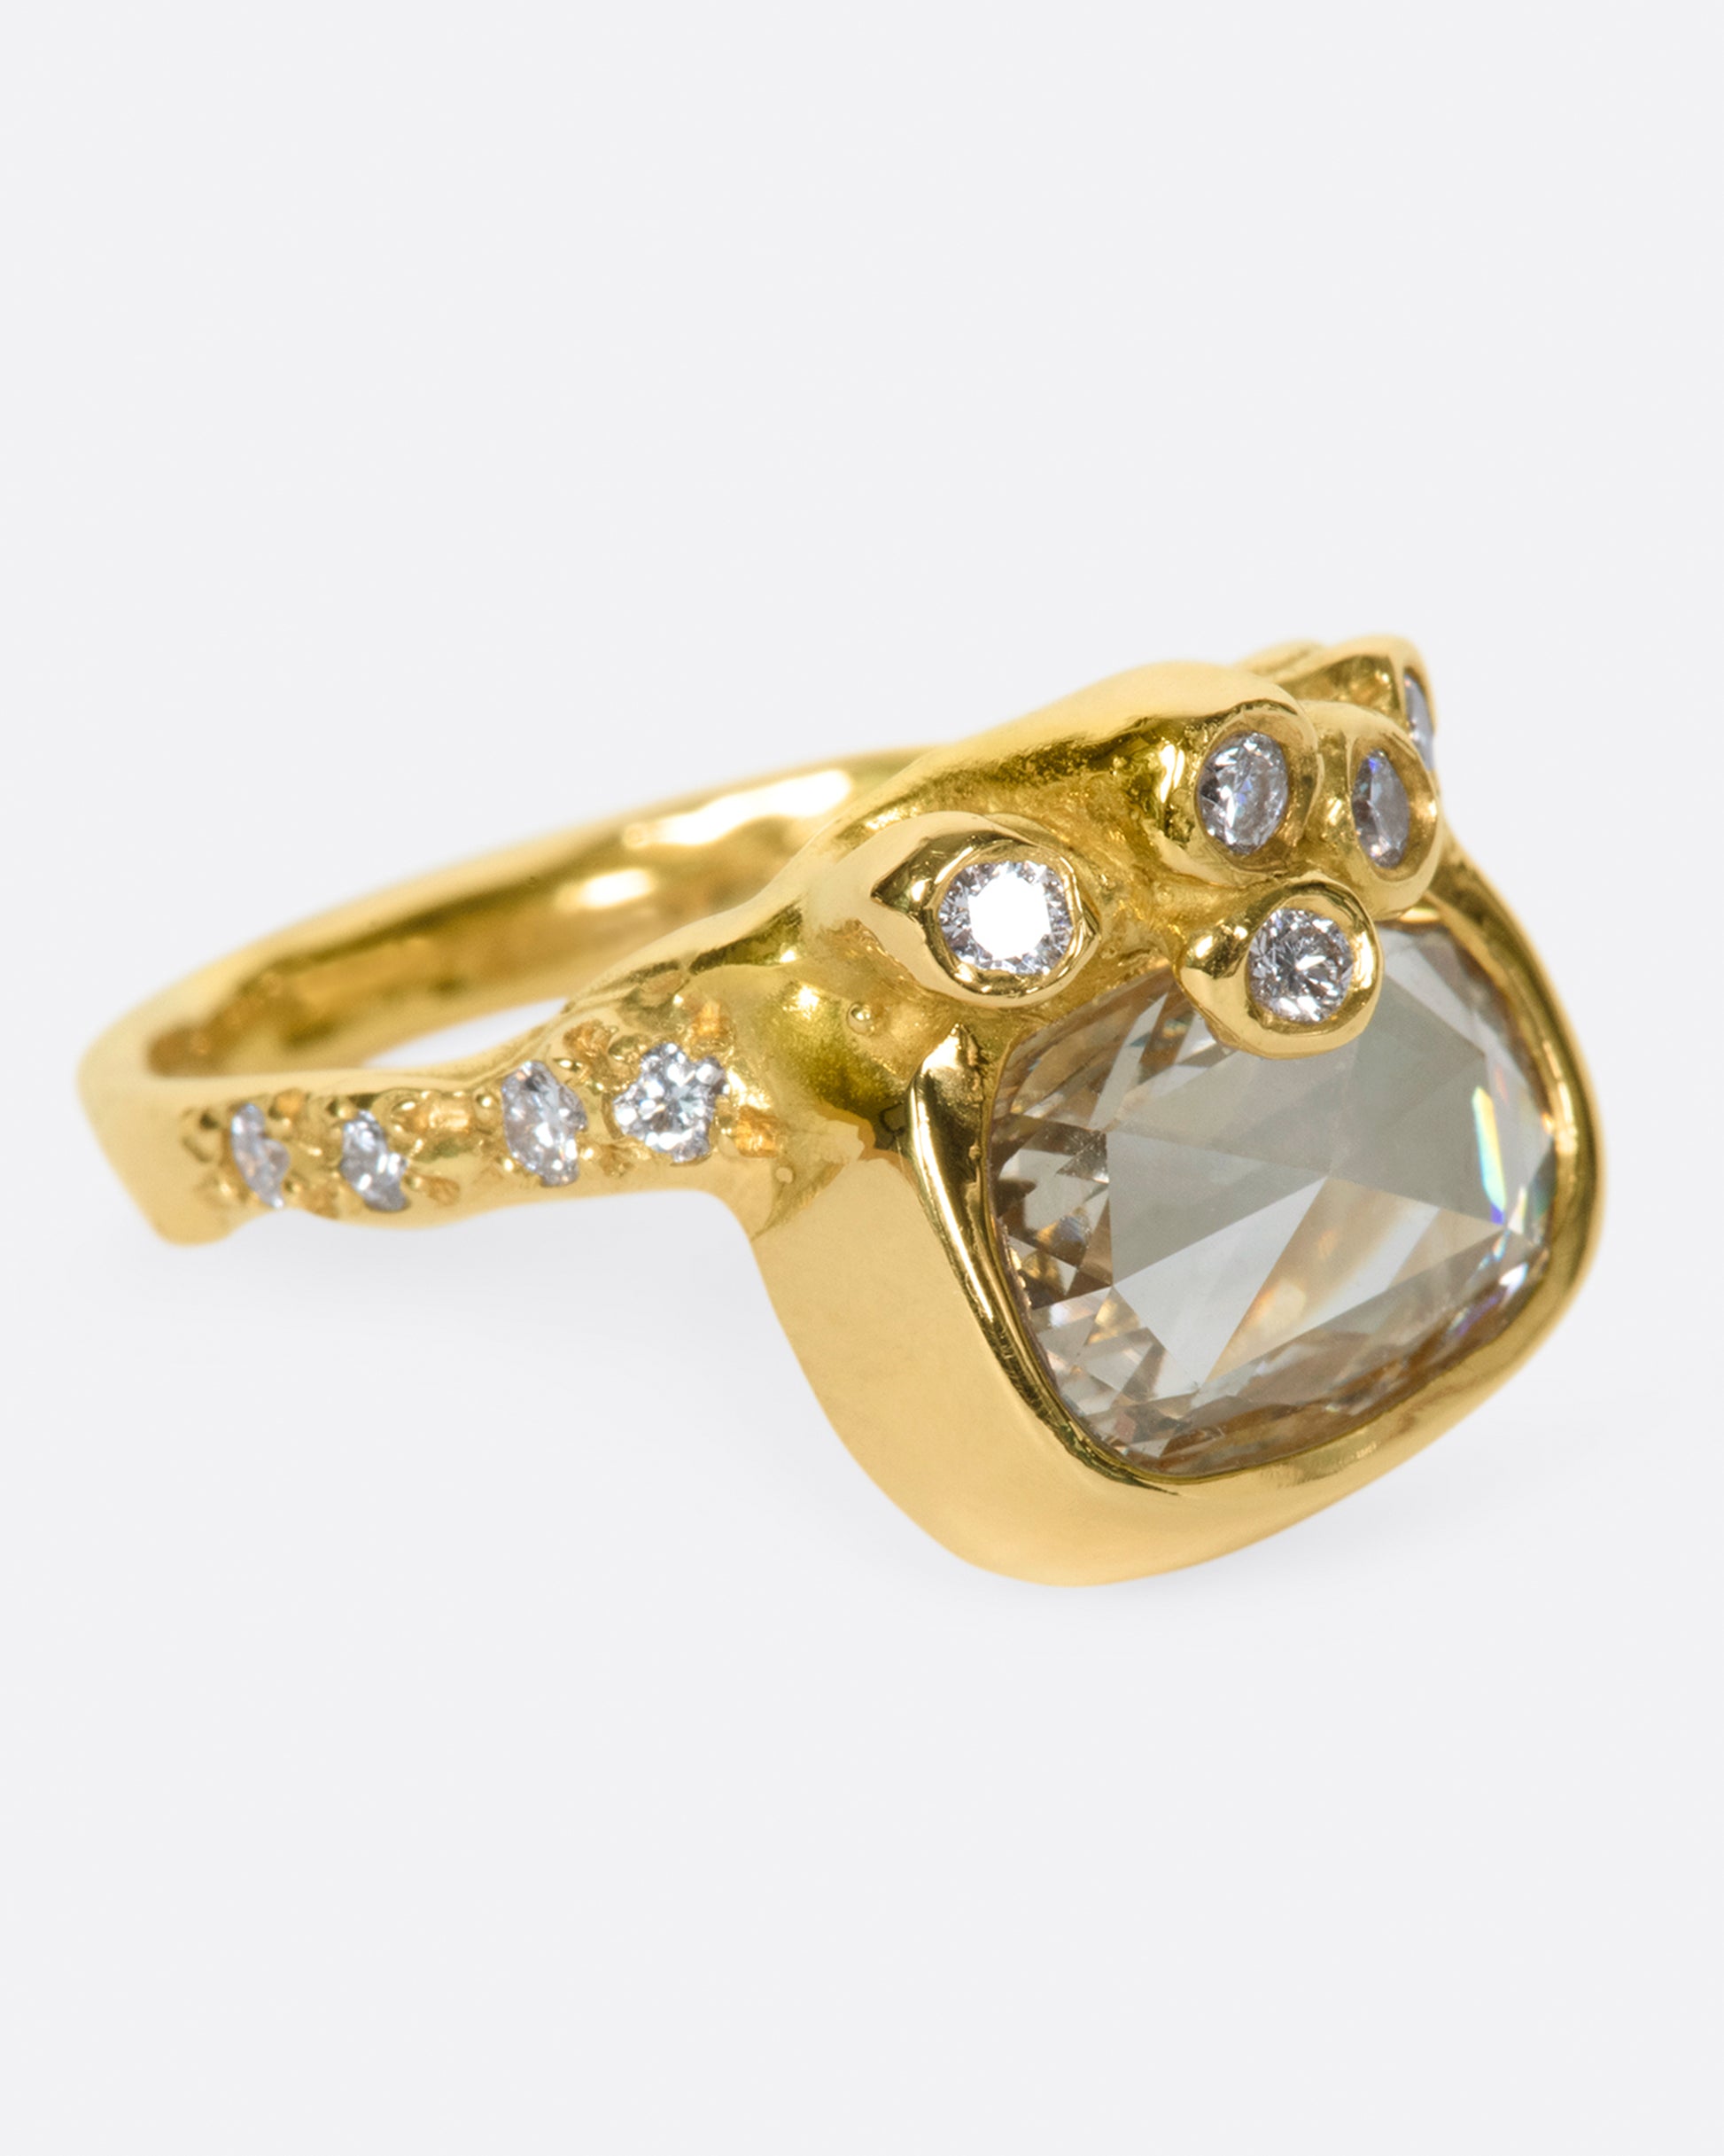 A yellow gold ring with an oval rose cut diamond sits atop an anemone-inspired band dotted with diamonds.